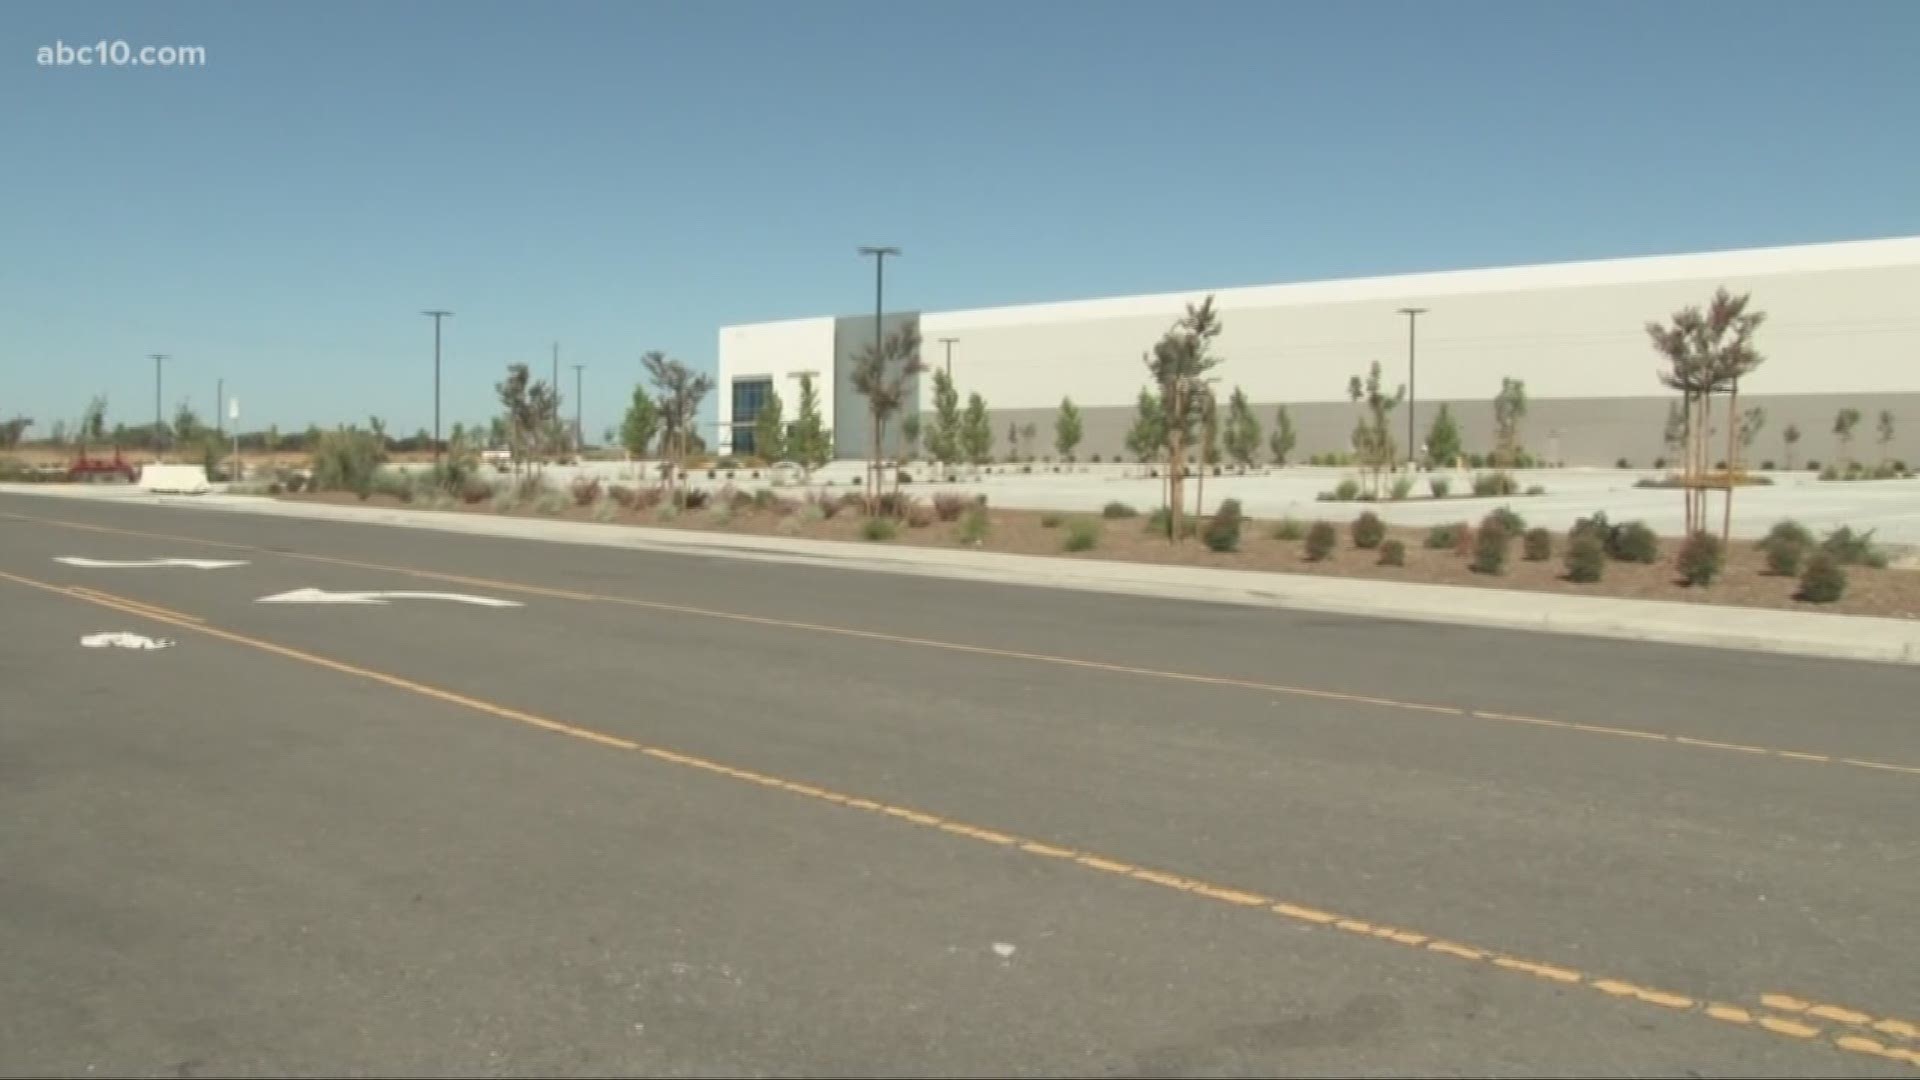 The City of Stockton announced that Amazon has chosen to open up a second facility in town that is expected to bring more than 1,000 new jobs to the area.